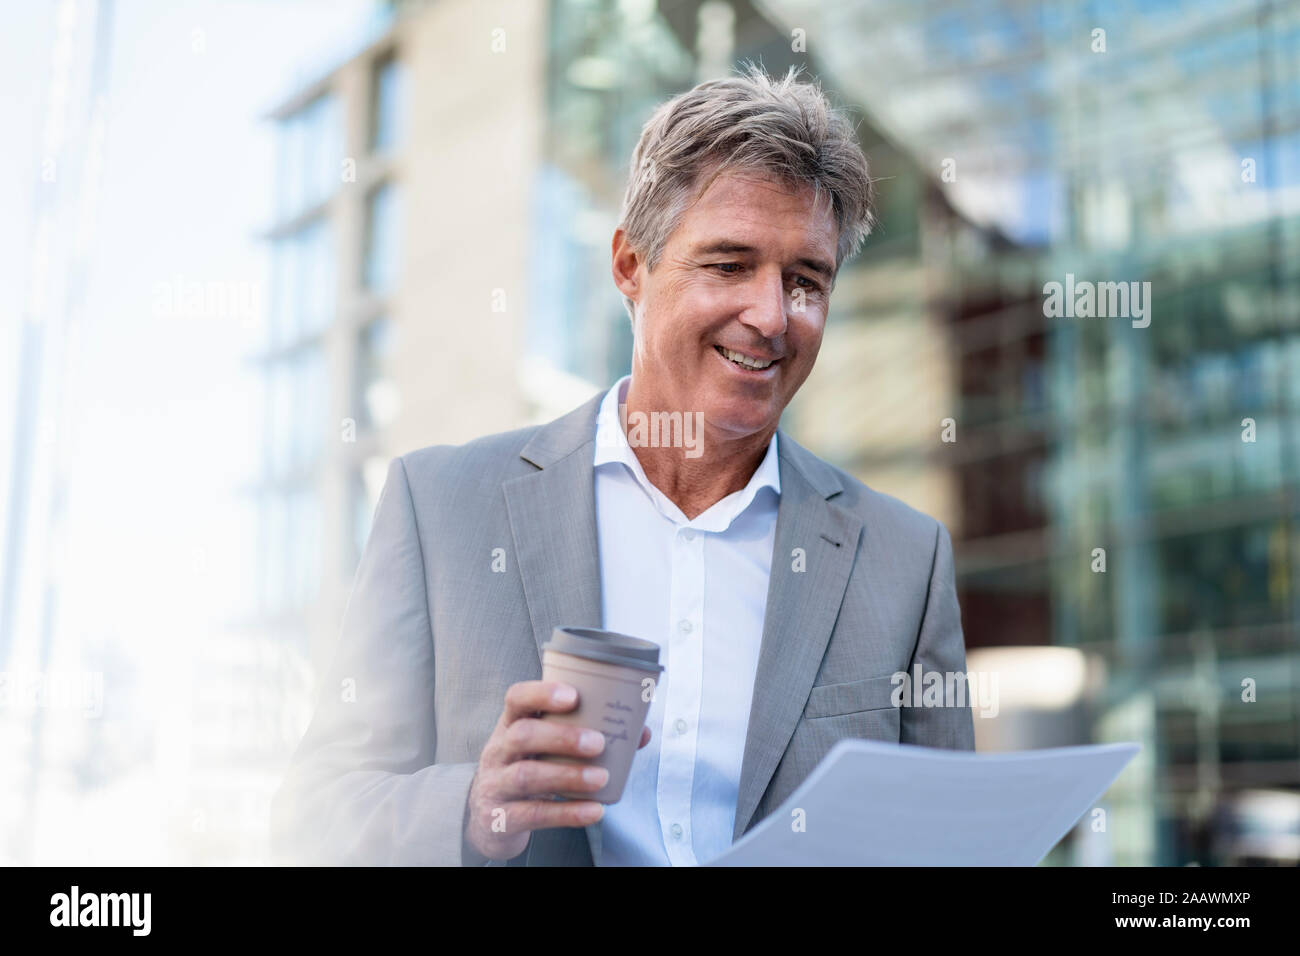 Smiling mature businessman with takeaway coffee reviewing documents in the city Stock Photo